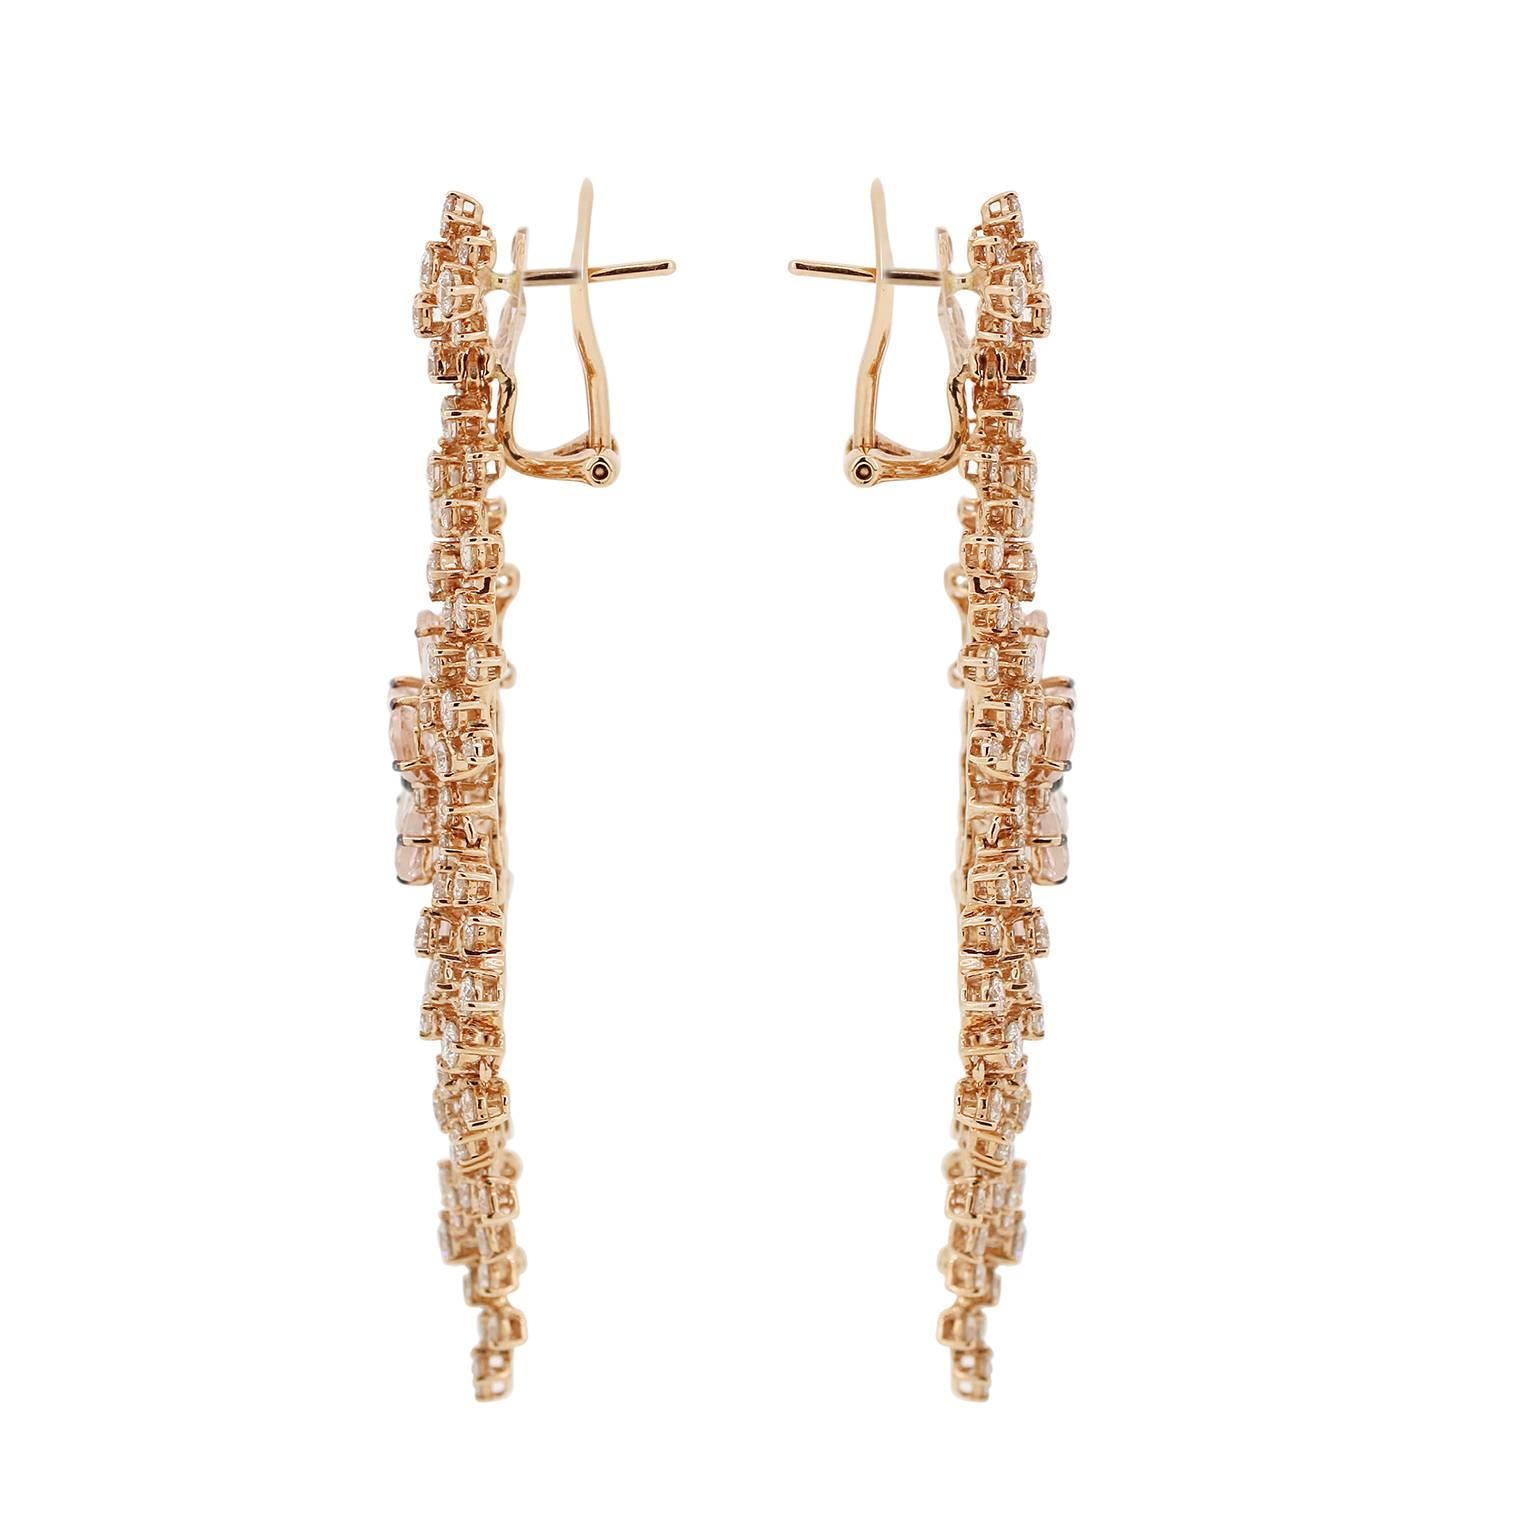 Ready for a black-tie affair? These are the earrings to have!  4.02 carats of Morganite that is in a floral motif surrounded by 7.82 carats of full cut diamonds. Post / Clip

Length - 69mm
Width - 27mm